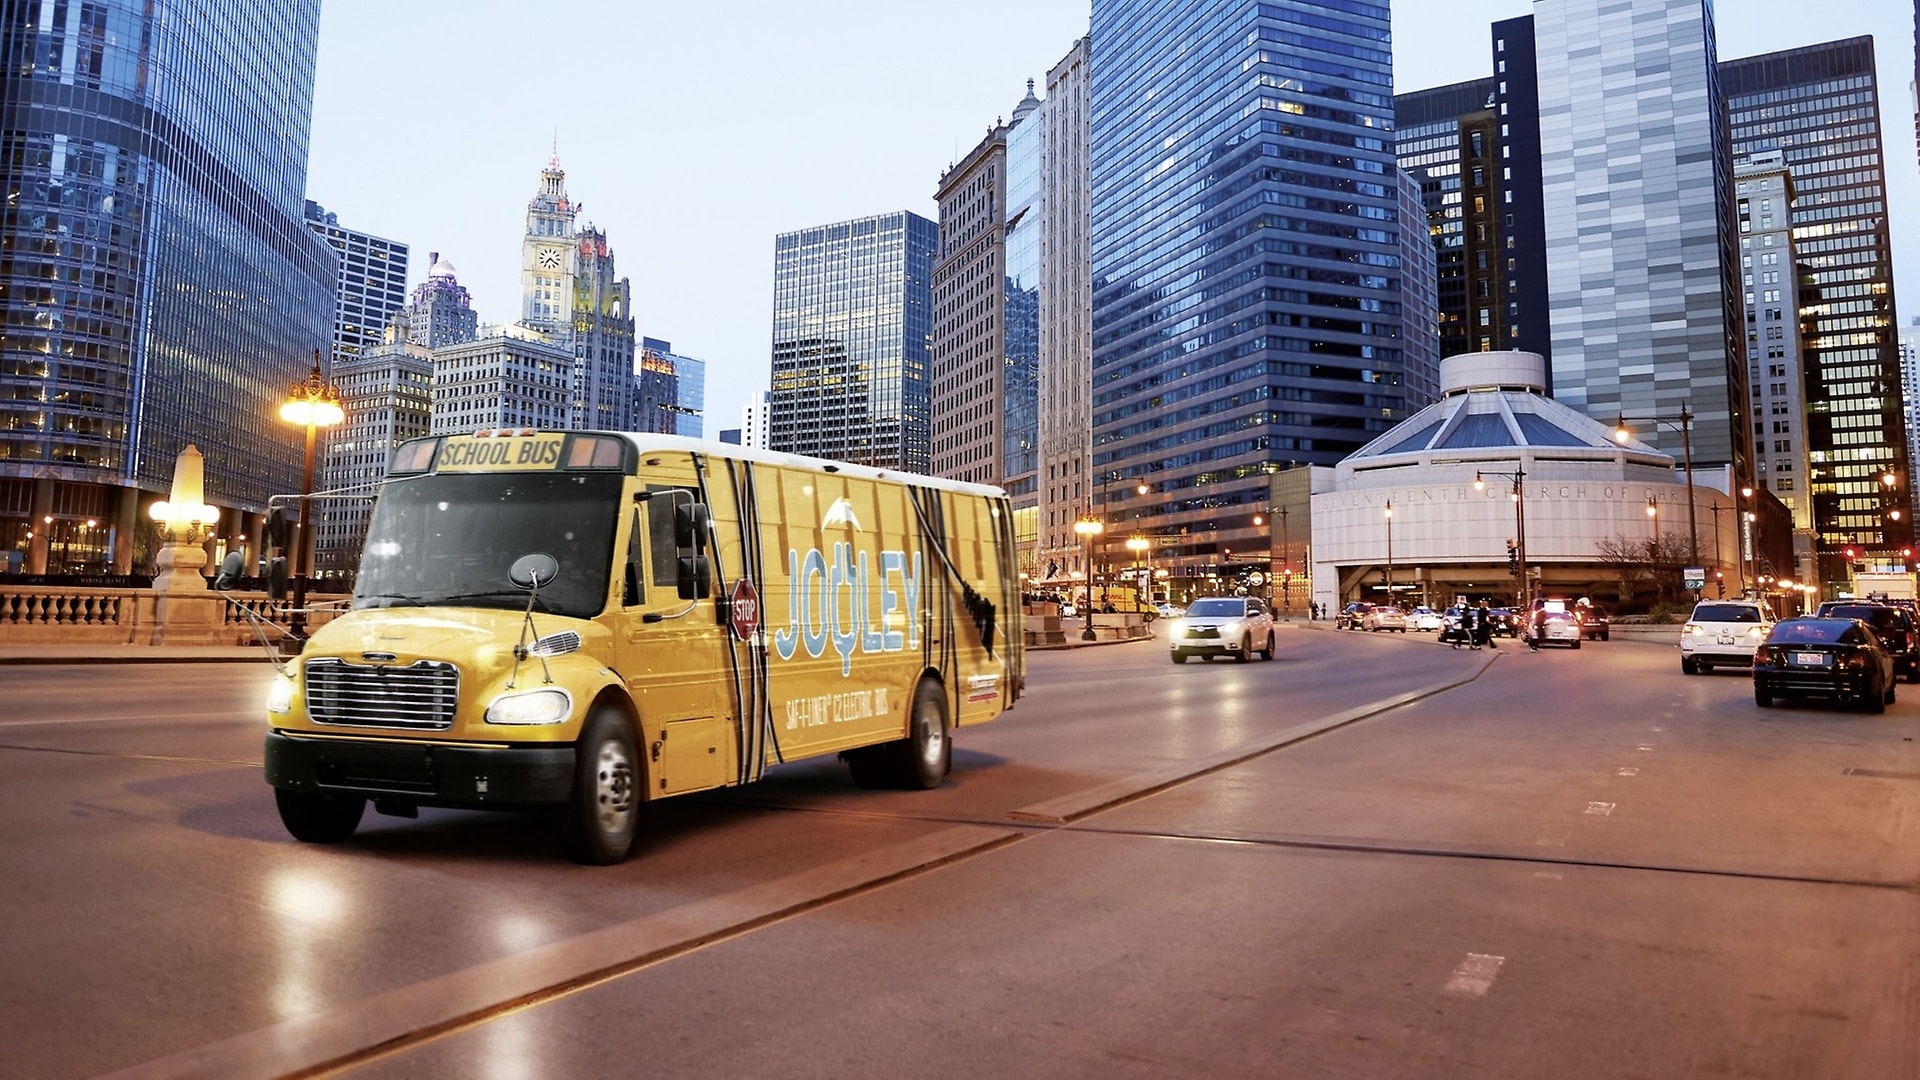 E-mobility at Daimler Trucks: Unveiling of the E-FUSO brand and an all-electric school bus from Thomas Built Buses.